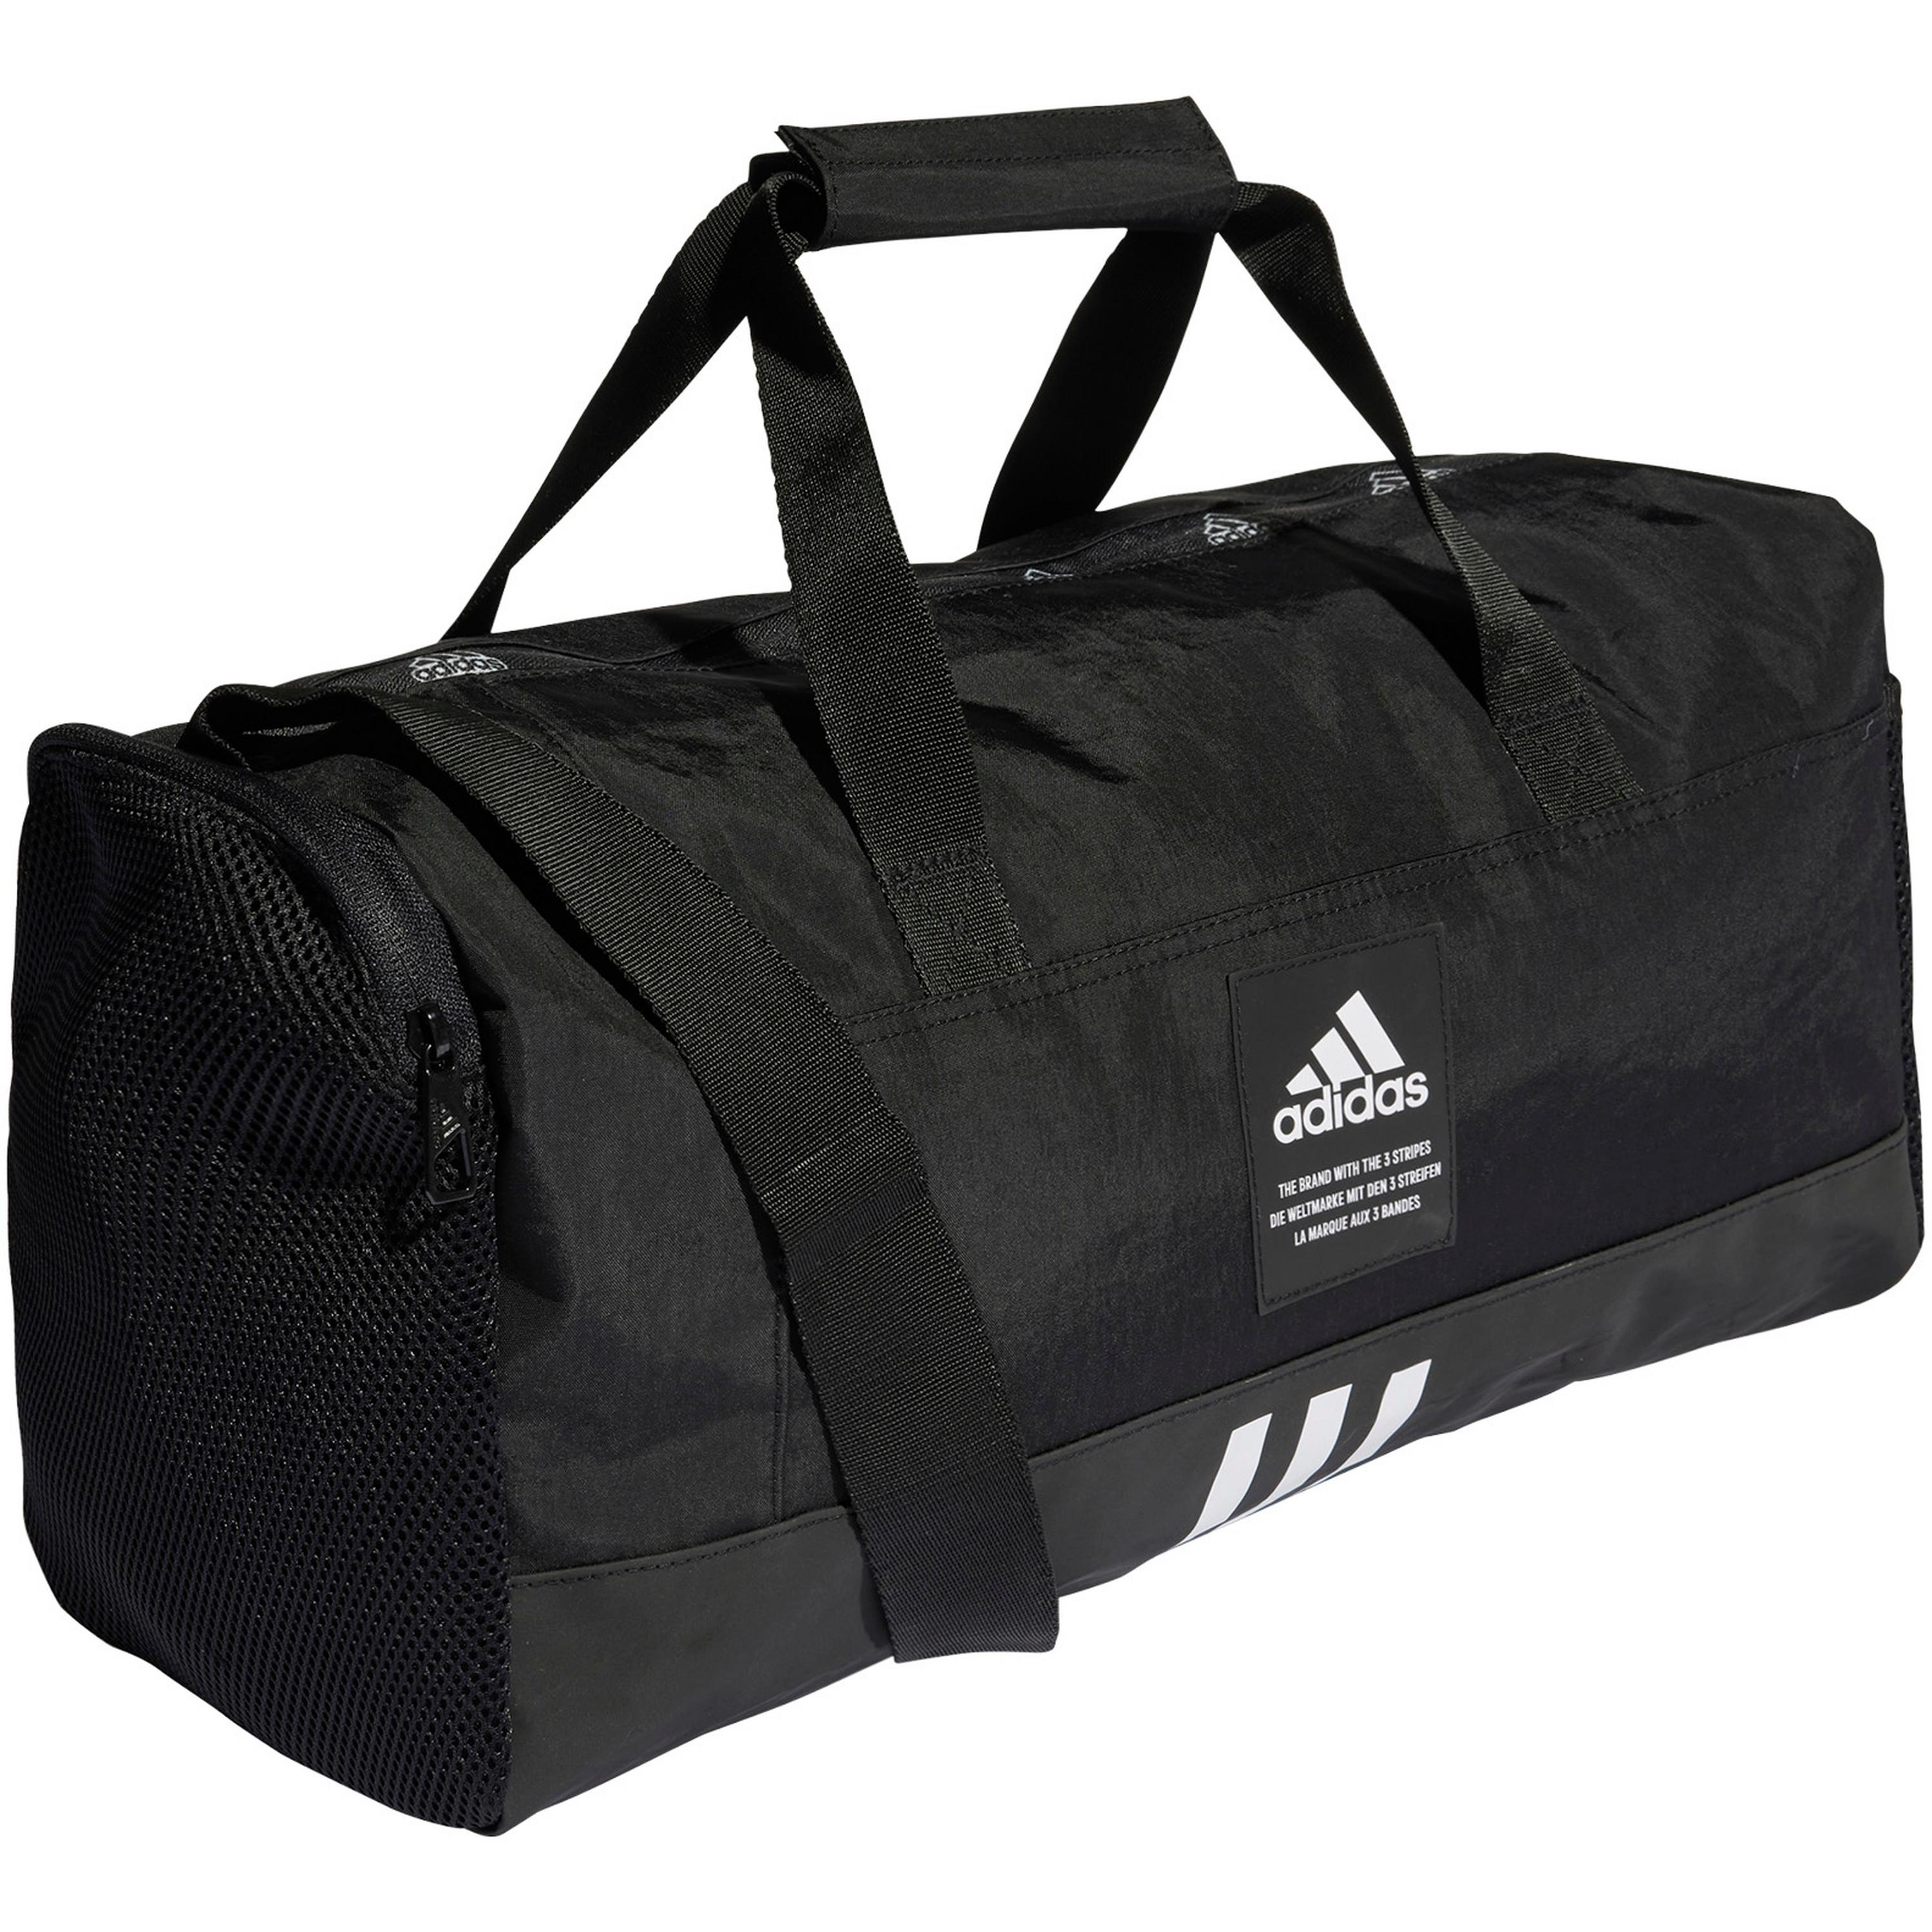 Image of adidas 4Athlts Duffle S Sporttasche